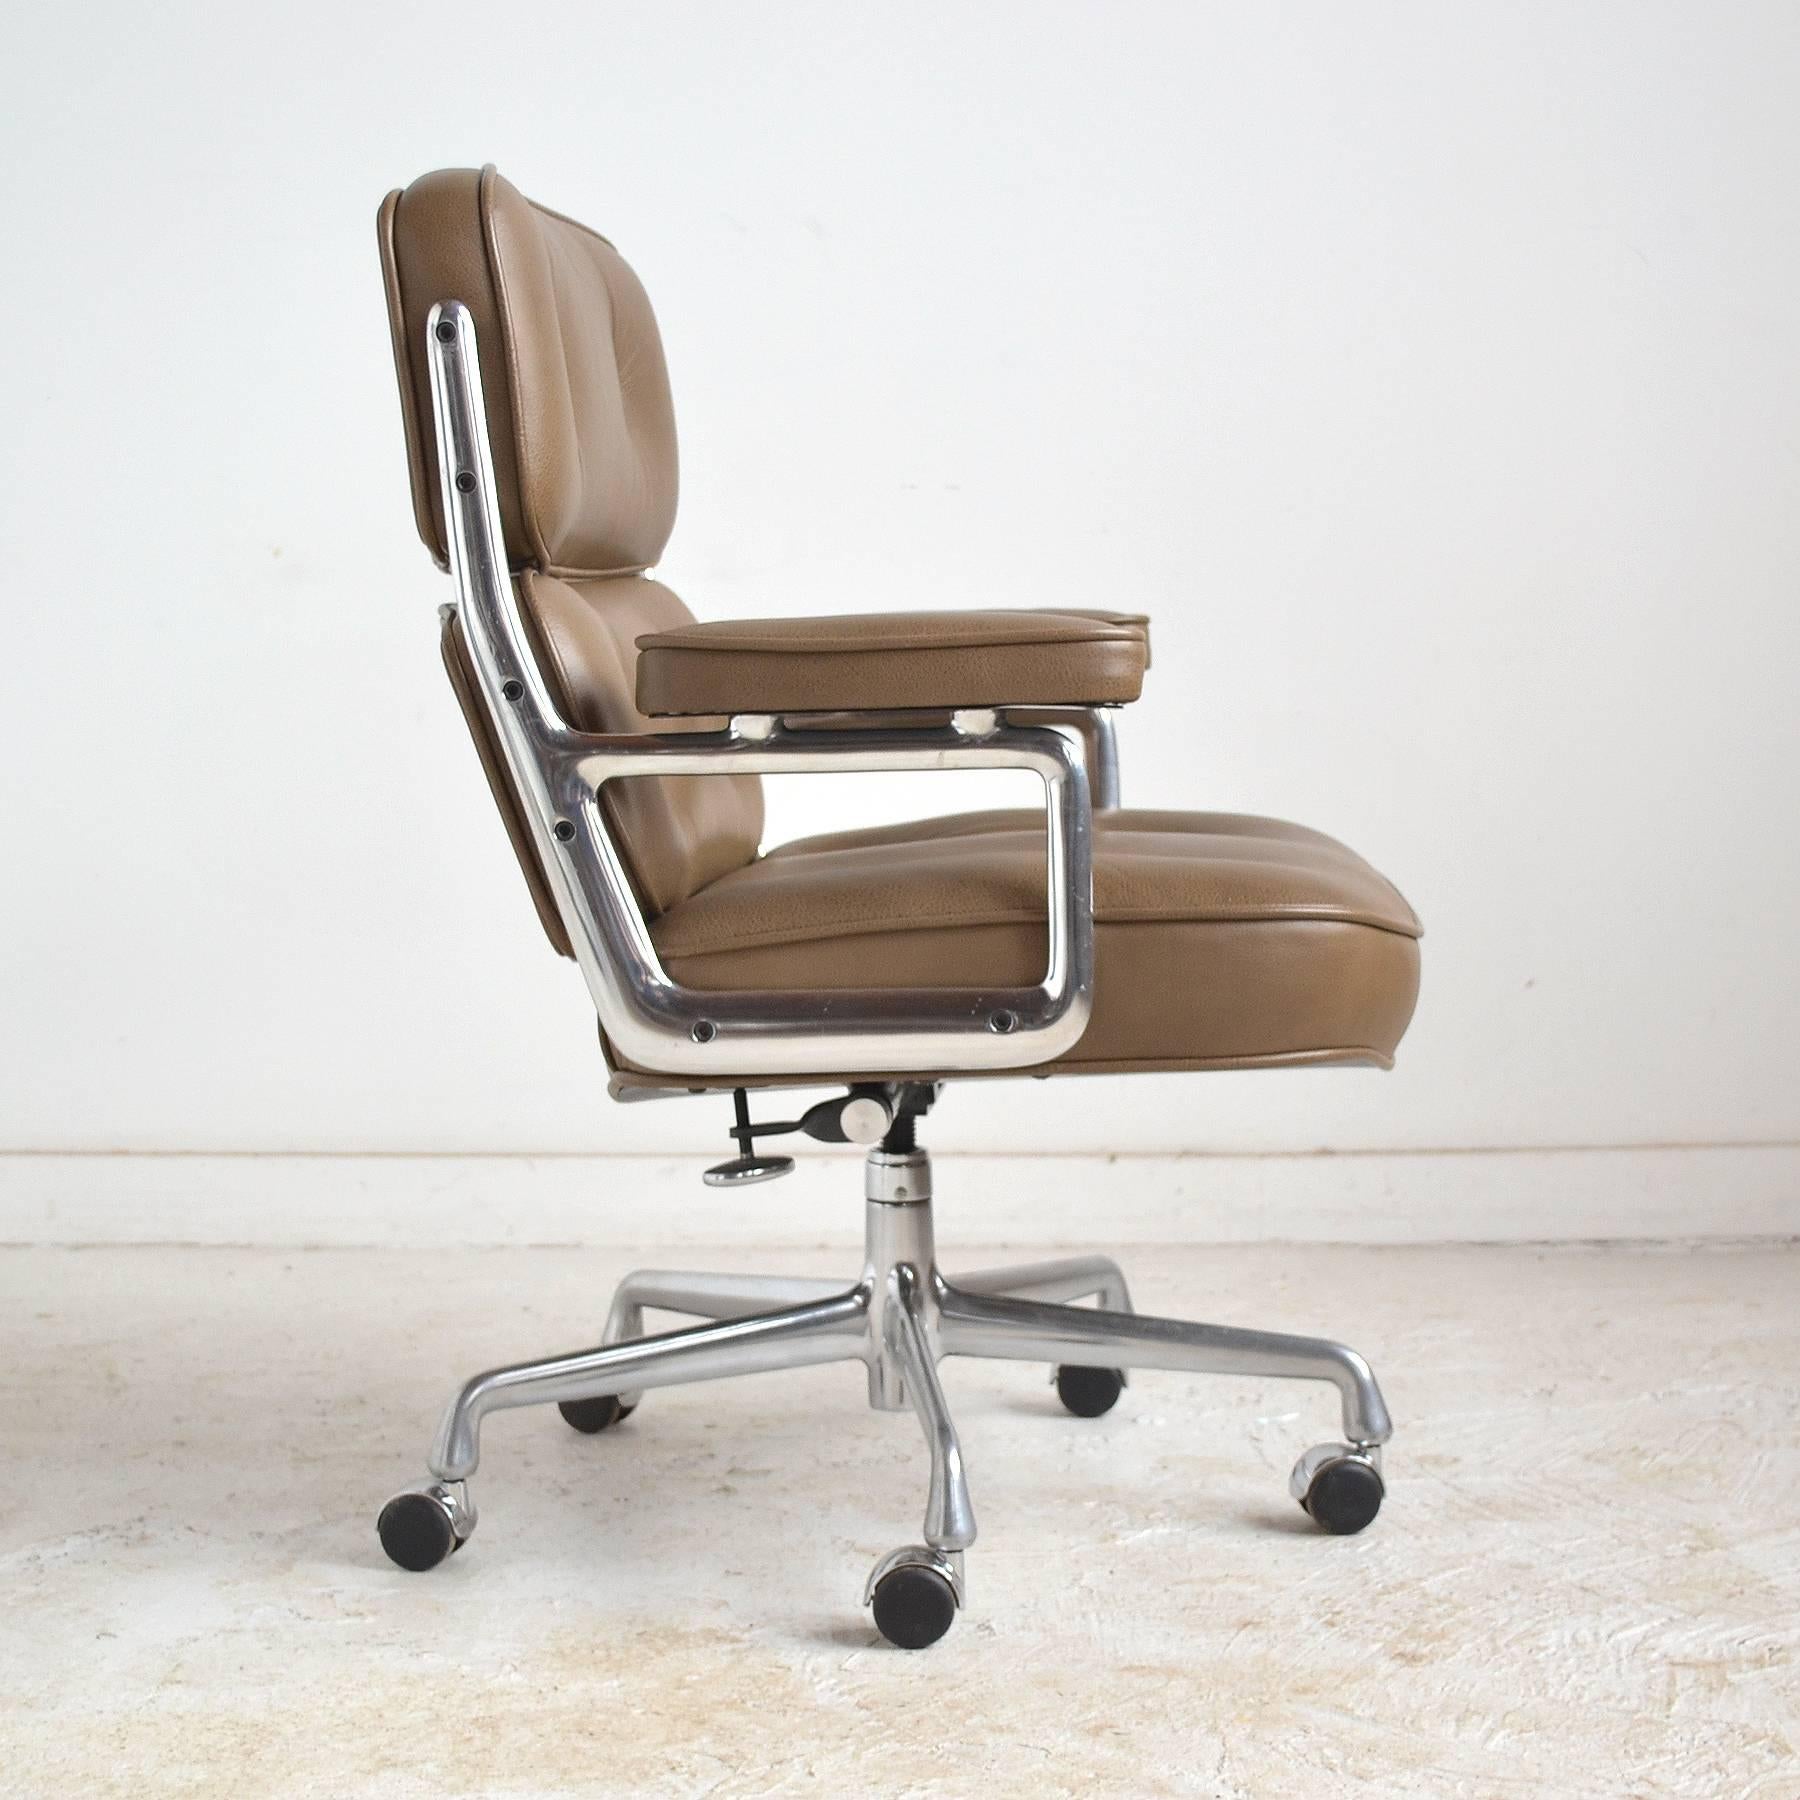 Charles and Ray Eames Time-Life Chair by Herman Miller 1